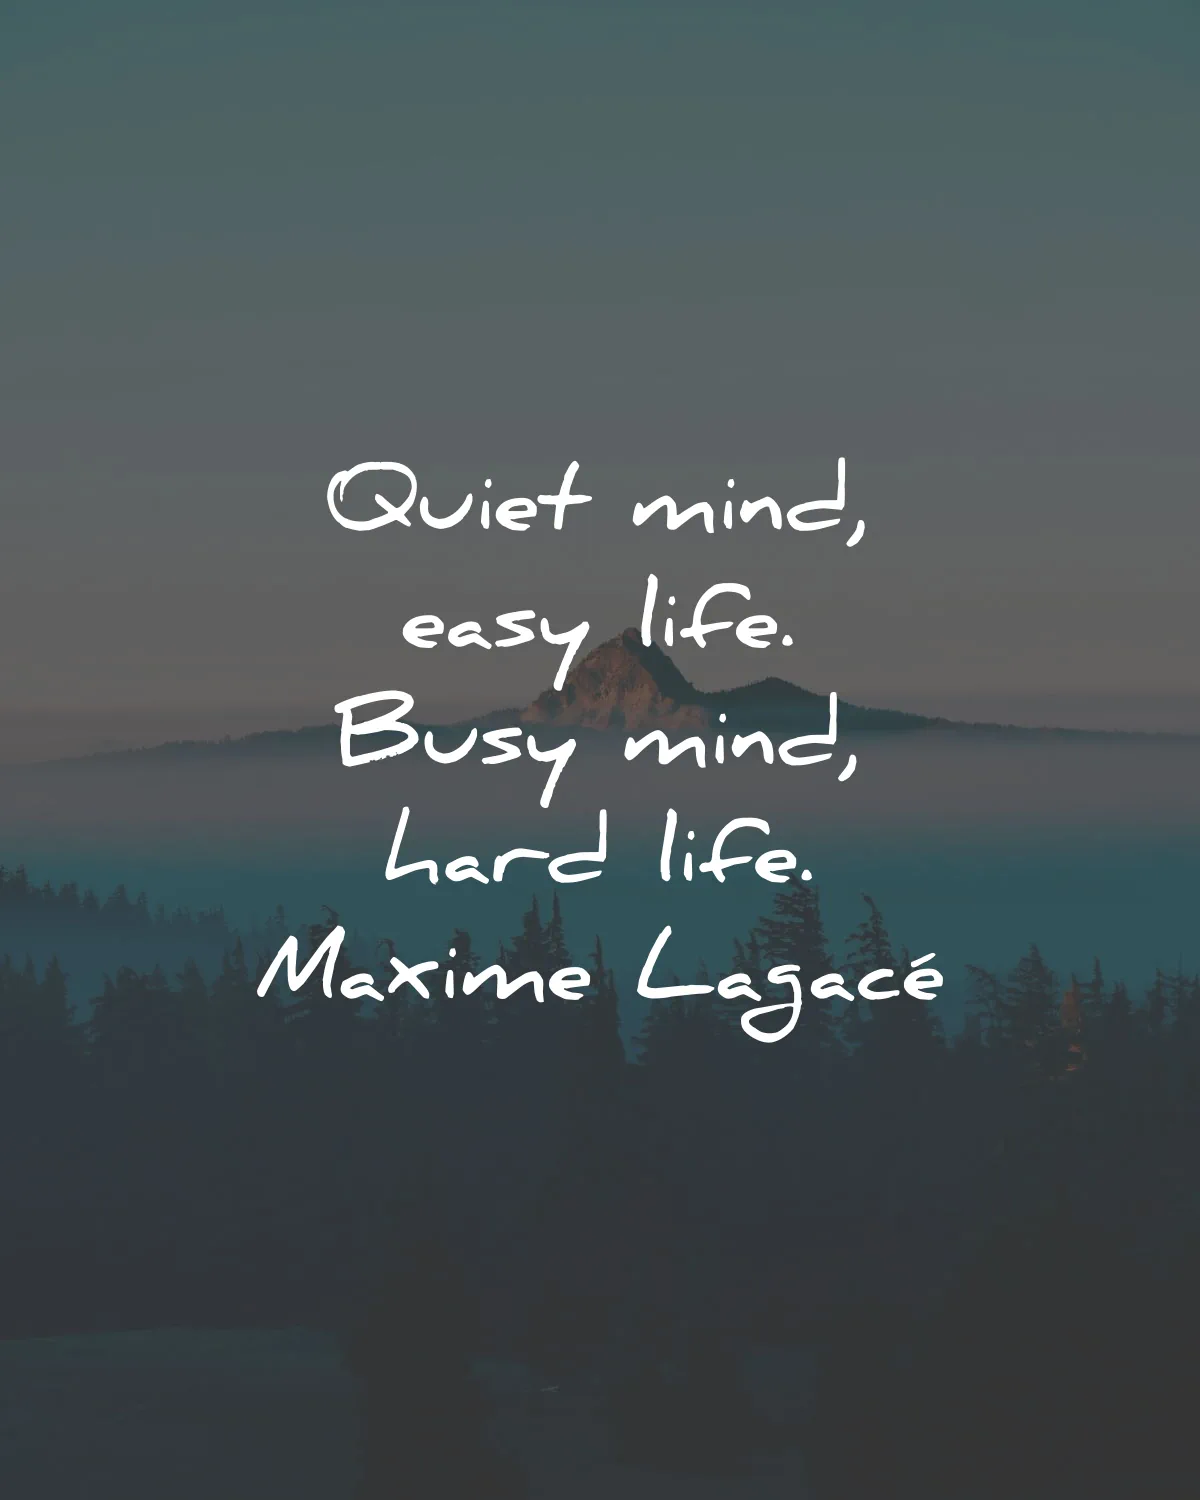 inner peace quotes quiet mind easy life busy mind hard life maxime lagace wisdom